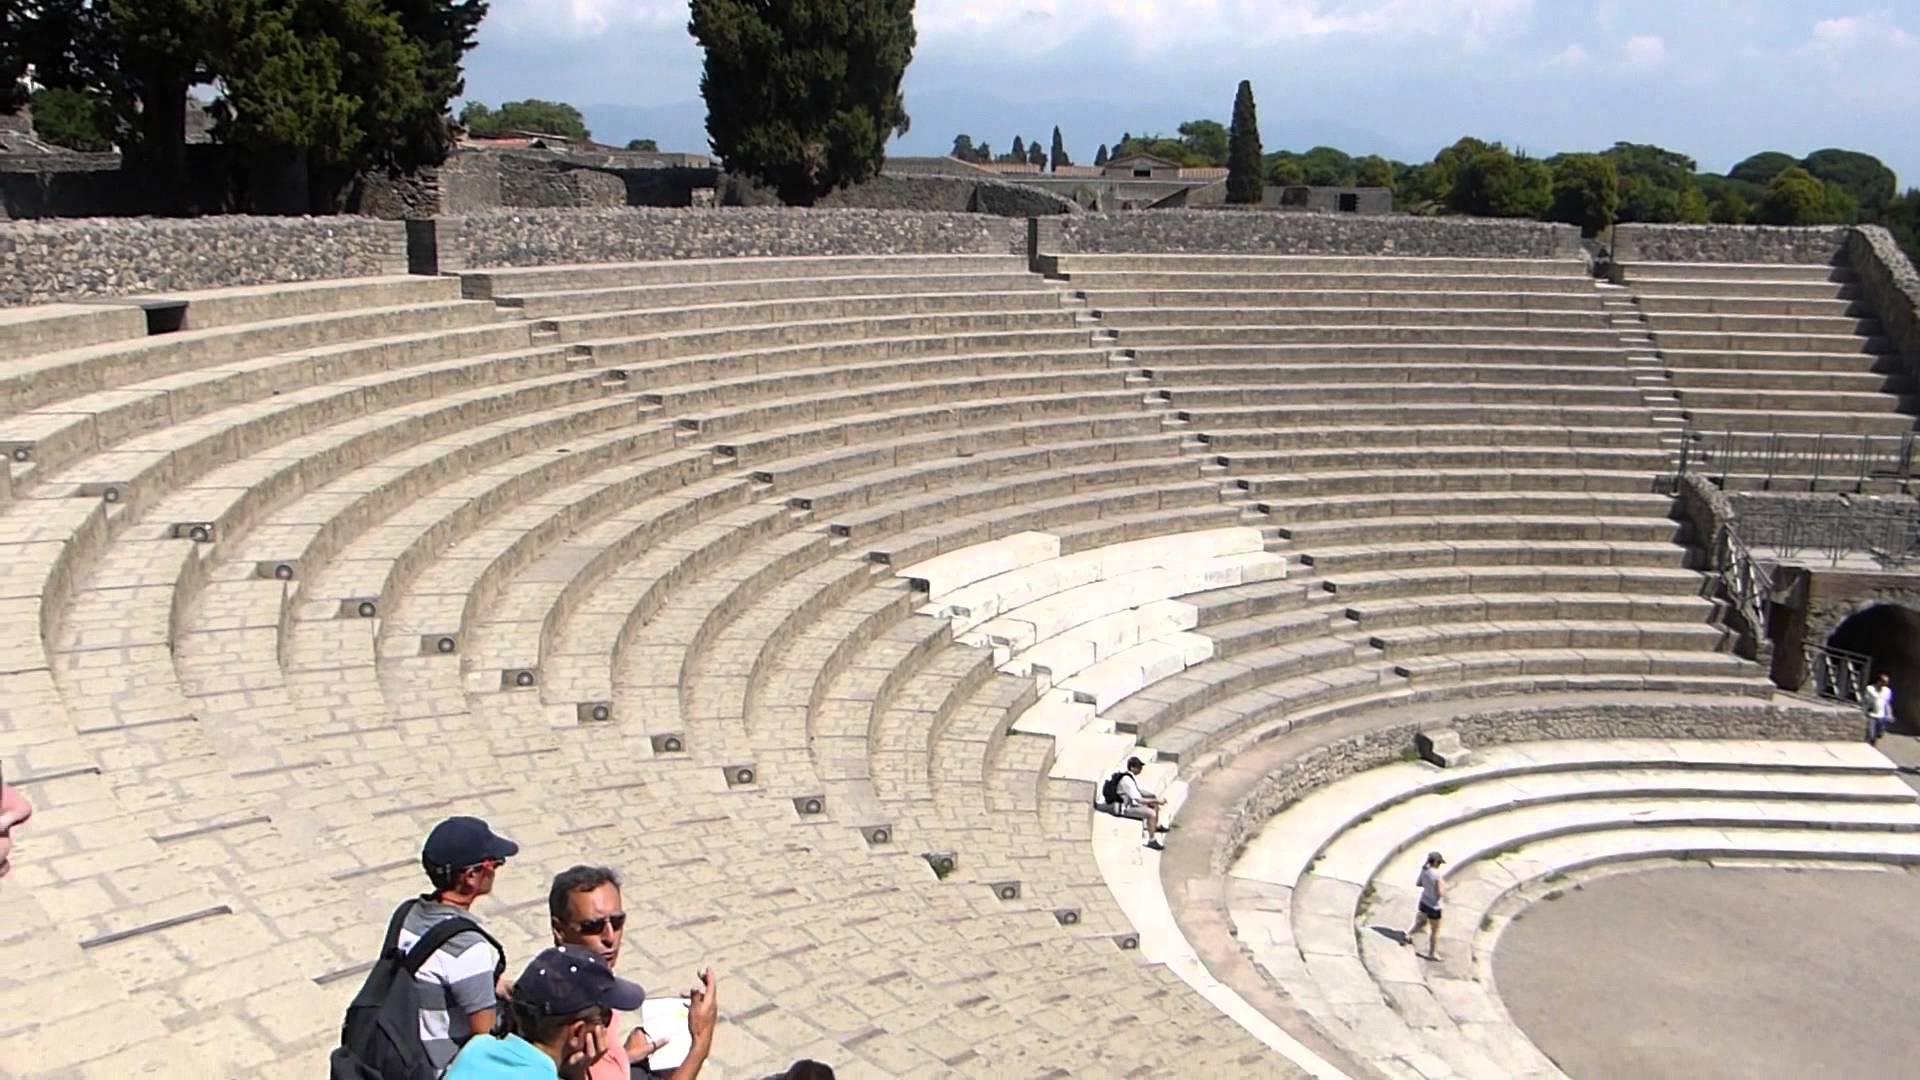 Amphitheatre Of Pompeii Wallpapers 10 - 1920 X 1080 | stmed.net